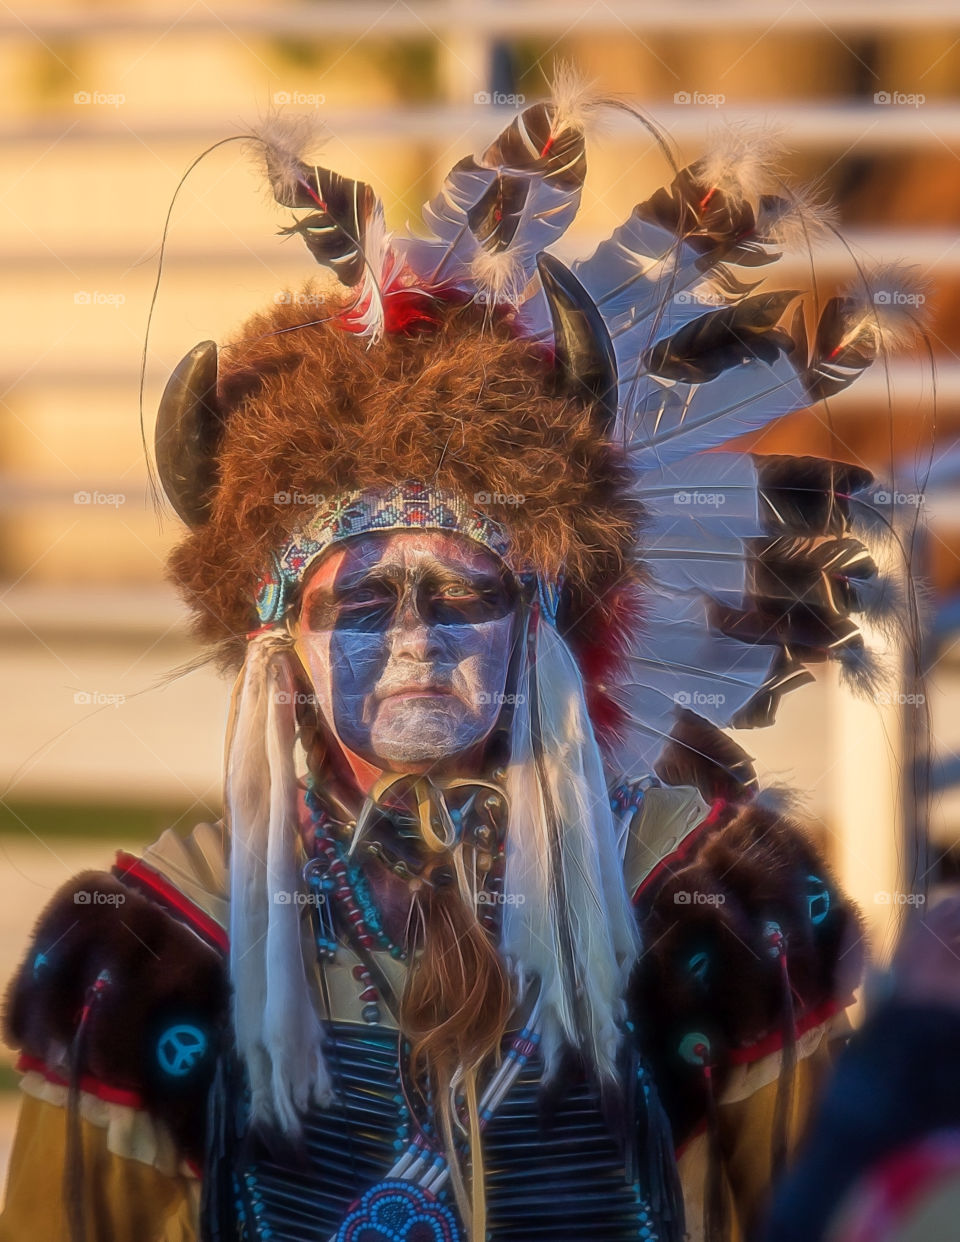 Native American Dancer. Stillwater Pow-wow at Anderson, California.
